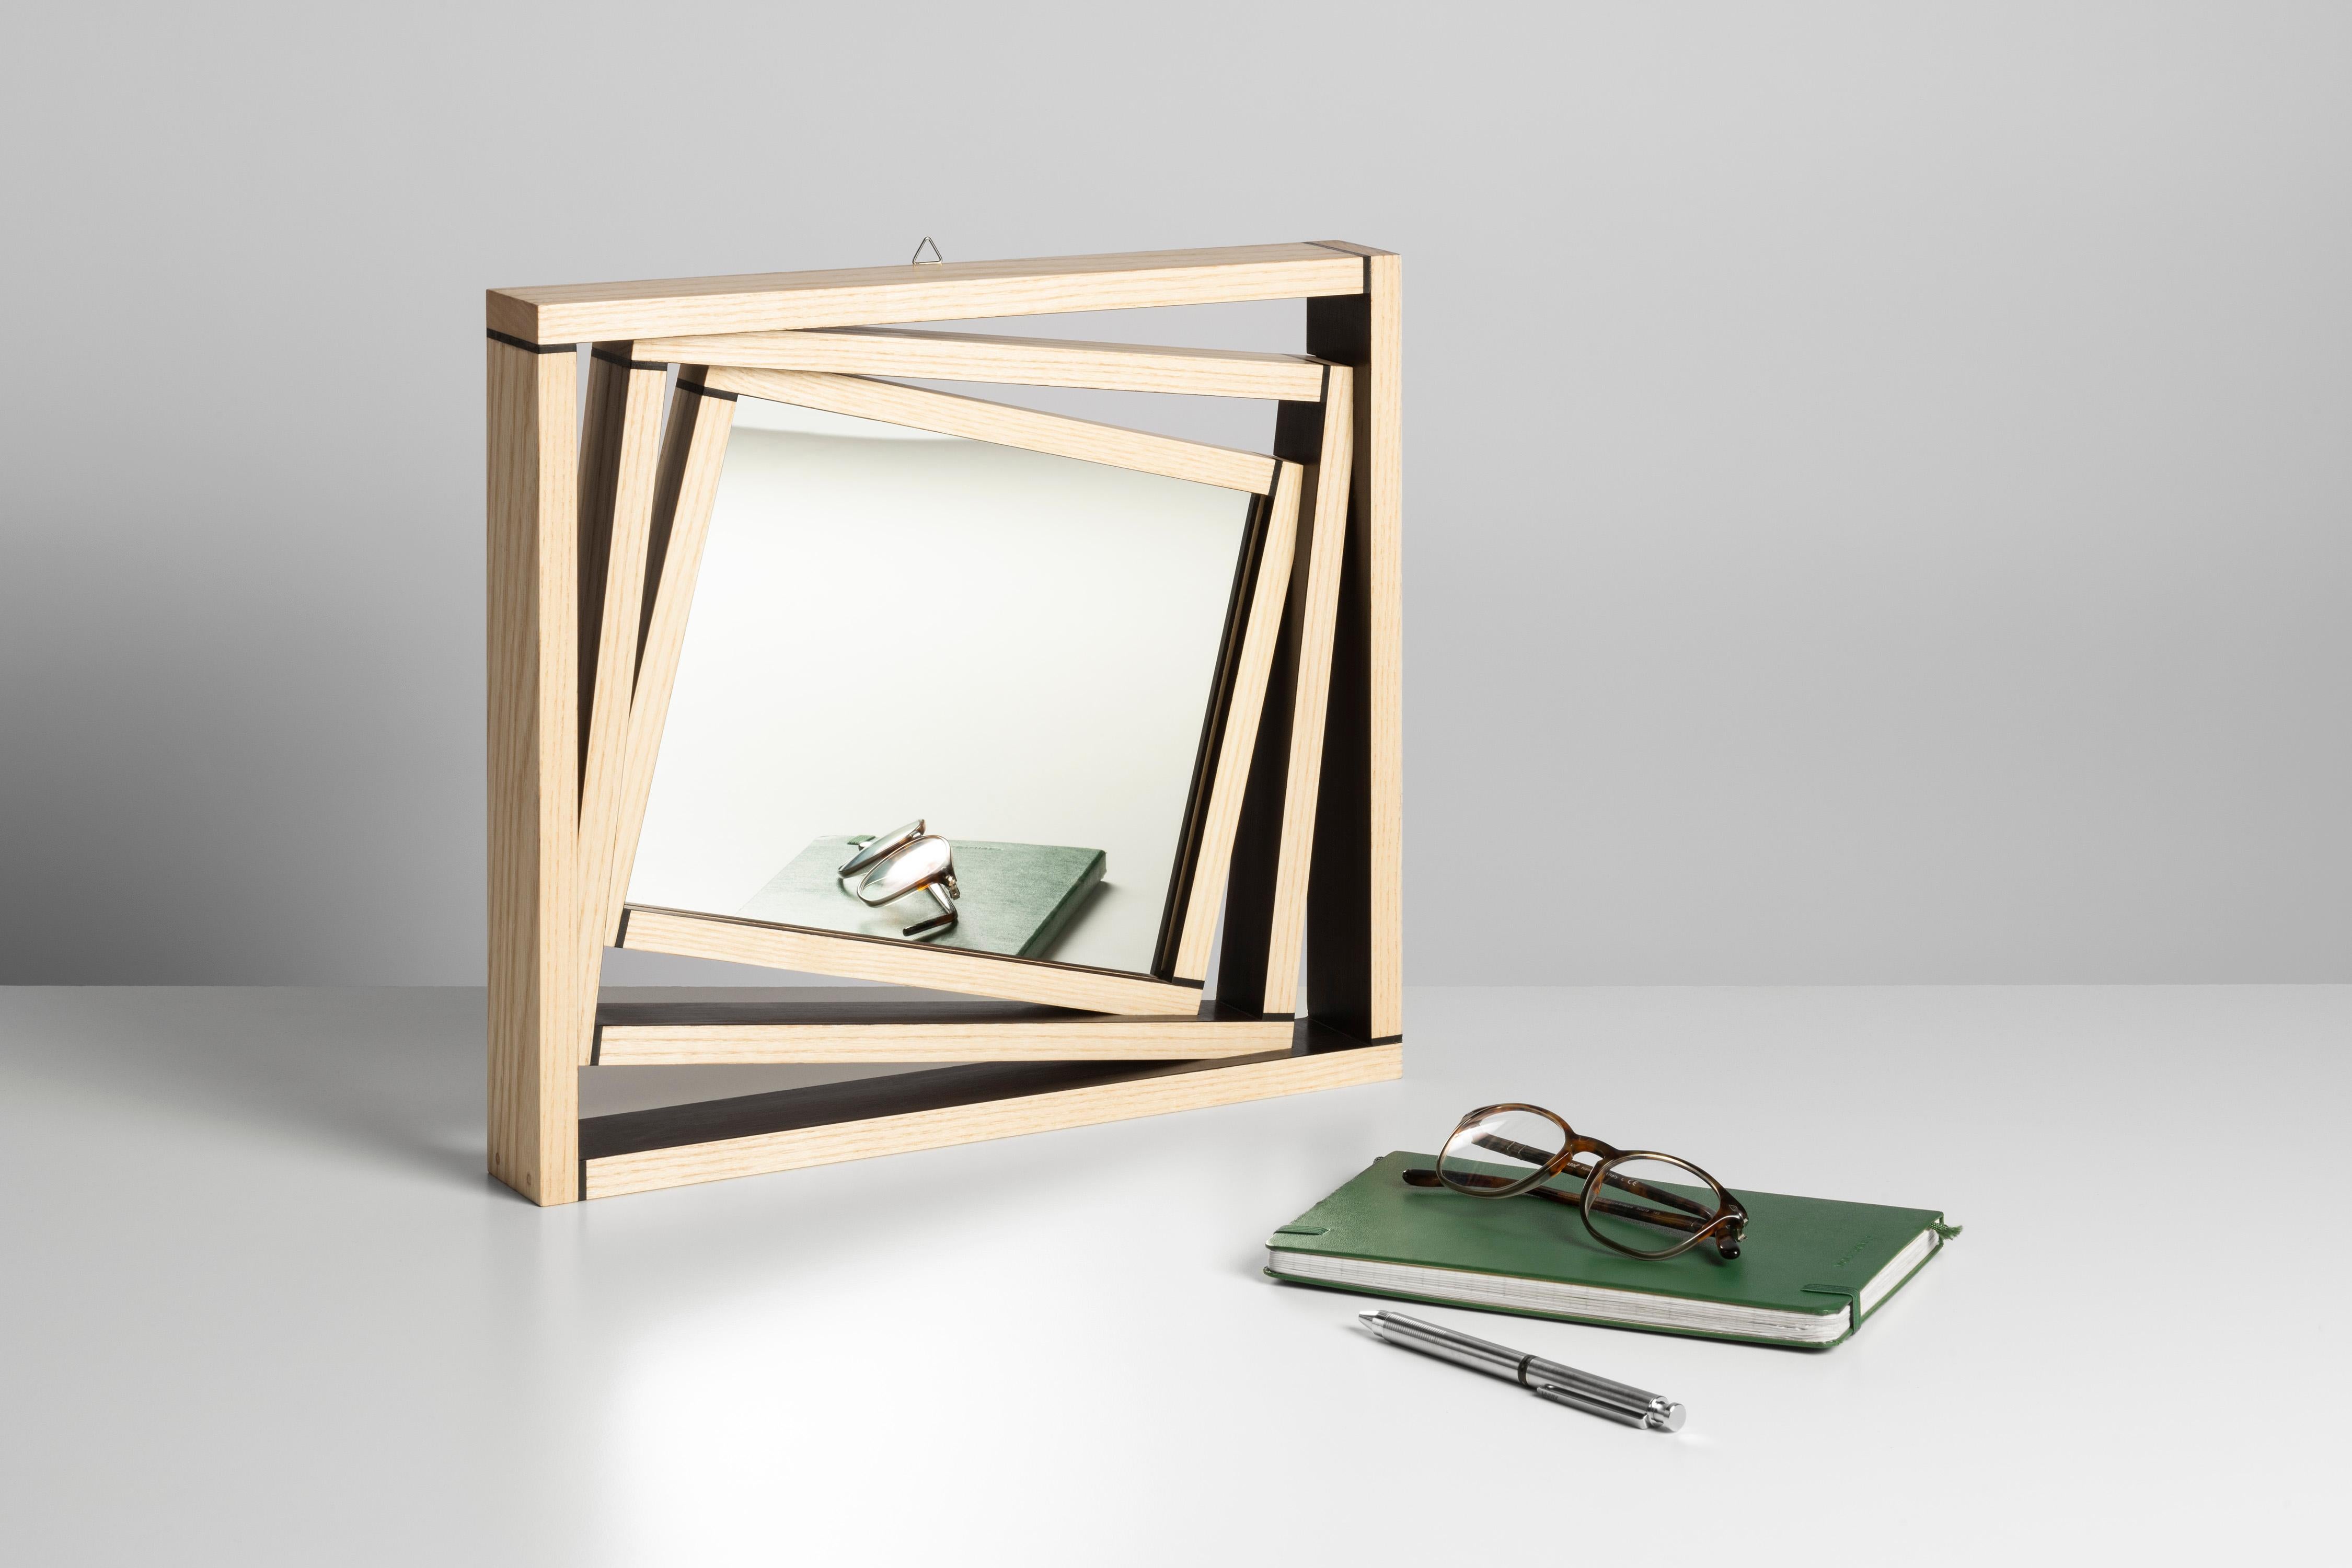 The frame of the mirror is composed of three elements that are progressively tilted and this particular detail gives depth to this minimalist piece made of ebony and ash. Solid ash is a light wood characterized by delicate grain that contrasts with